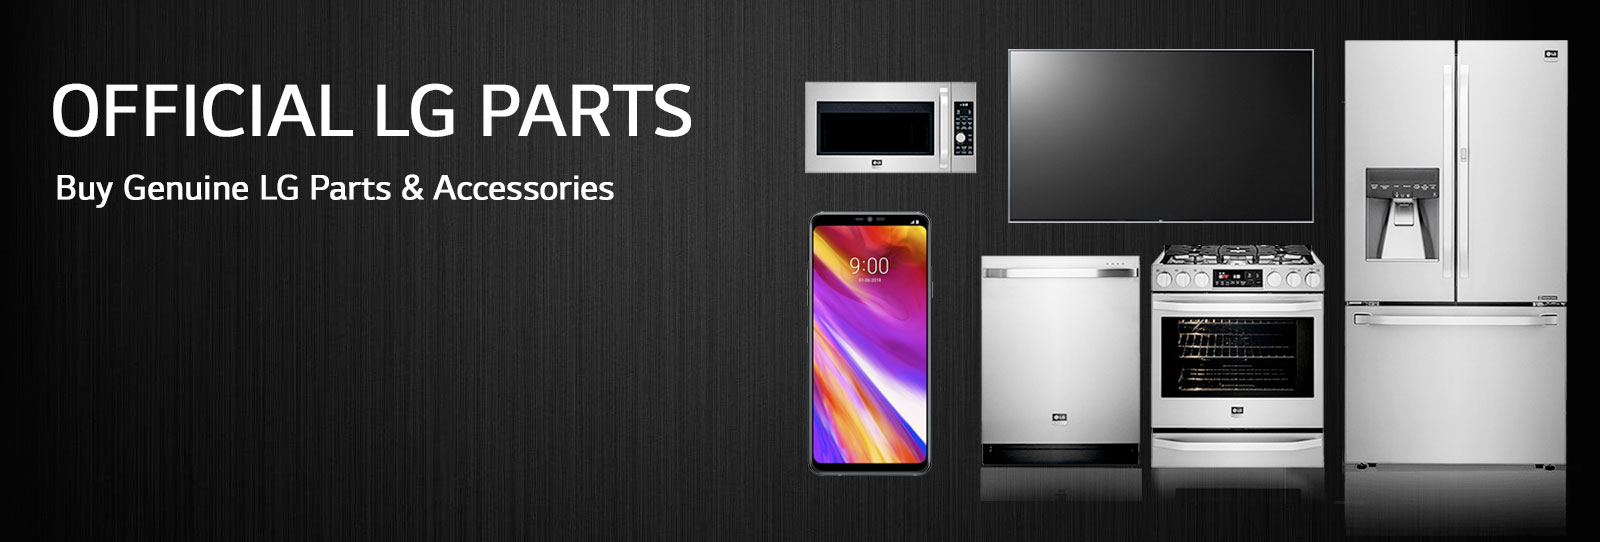 Official LG Parts - Buy Genuine LG Parts & Accessories